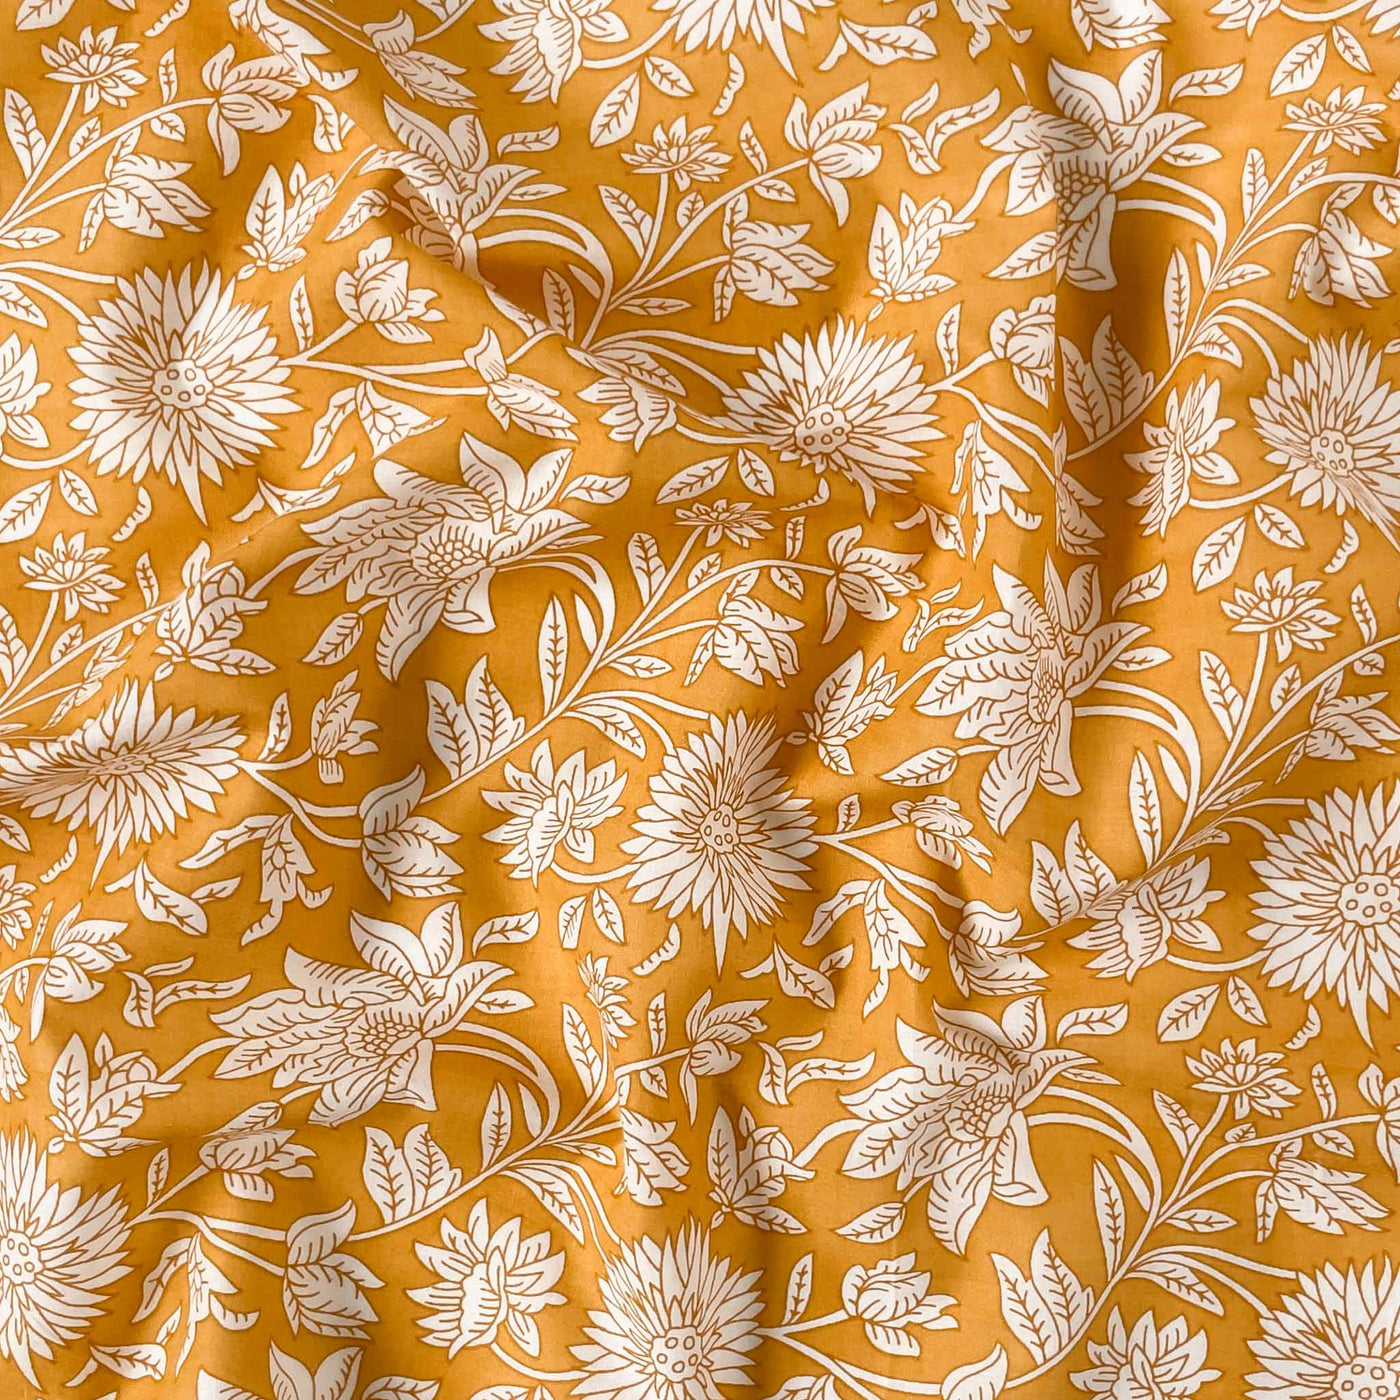 Fabric Pandit Fabric Mango Yellow & White Sunflowers and Lilies Screen Printed Pure Cotton Fabric (Width 43 inches)